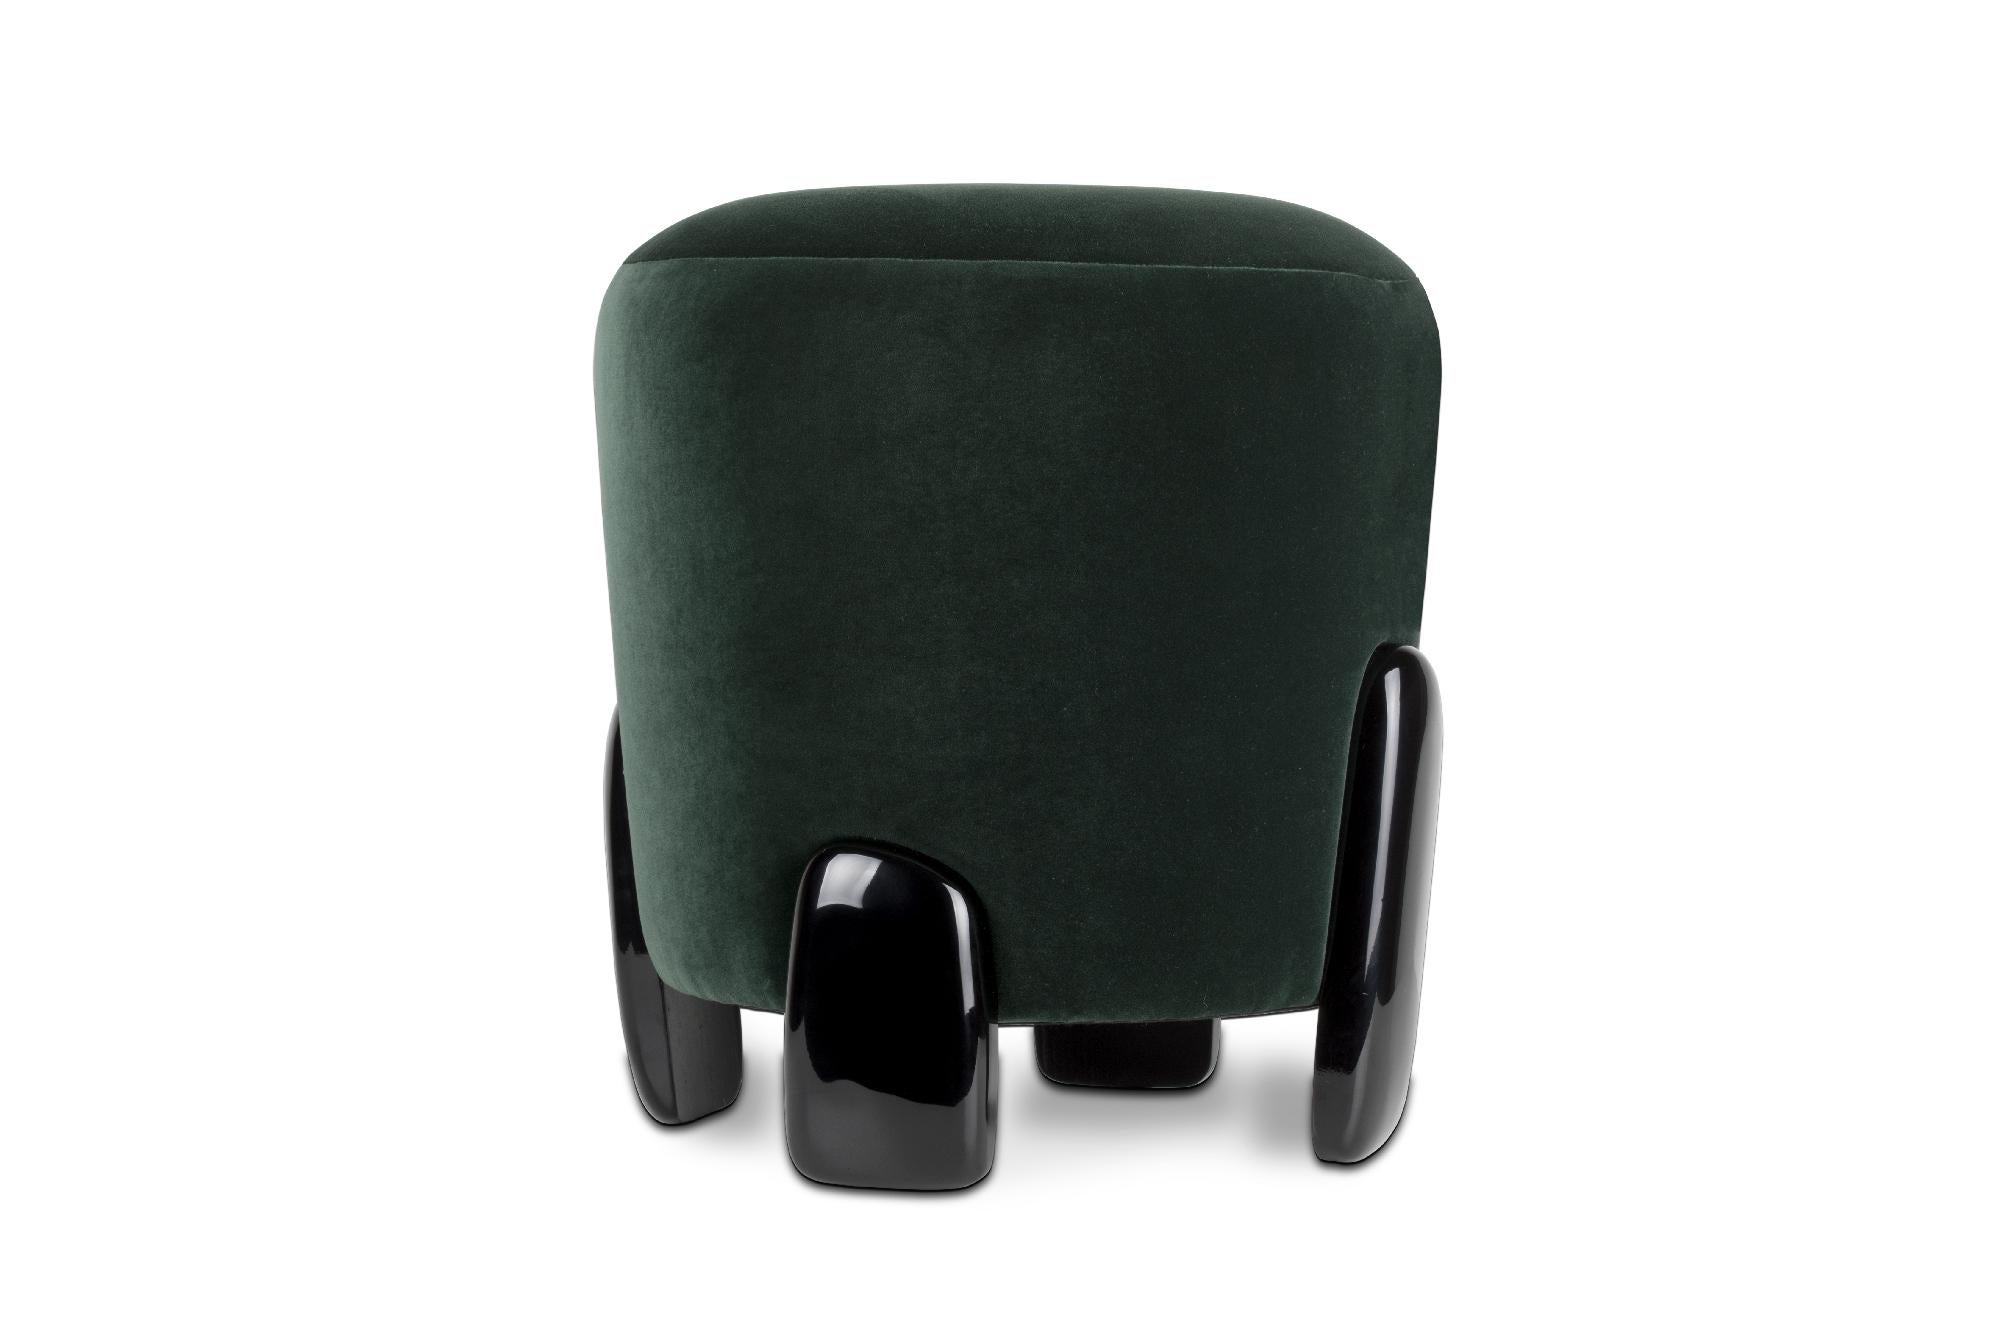 The monolithic statues of Easter Islands, known for Moai or Naoki, were the inspiration behind Noaki stool. With a seating in velvet and a base in glossy black lacquer, this distinct contemporary stool is perfect to use as a table stool, living room